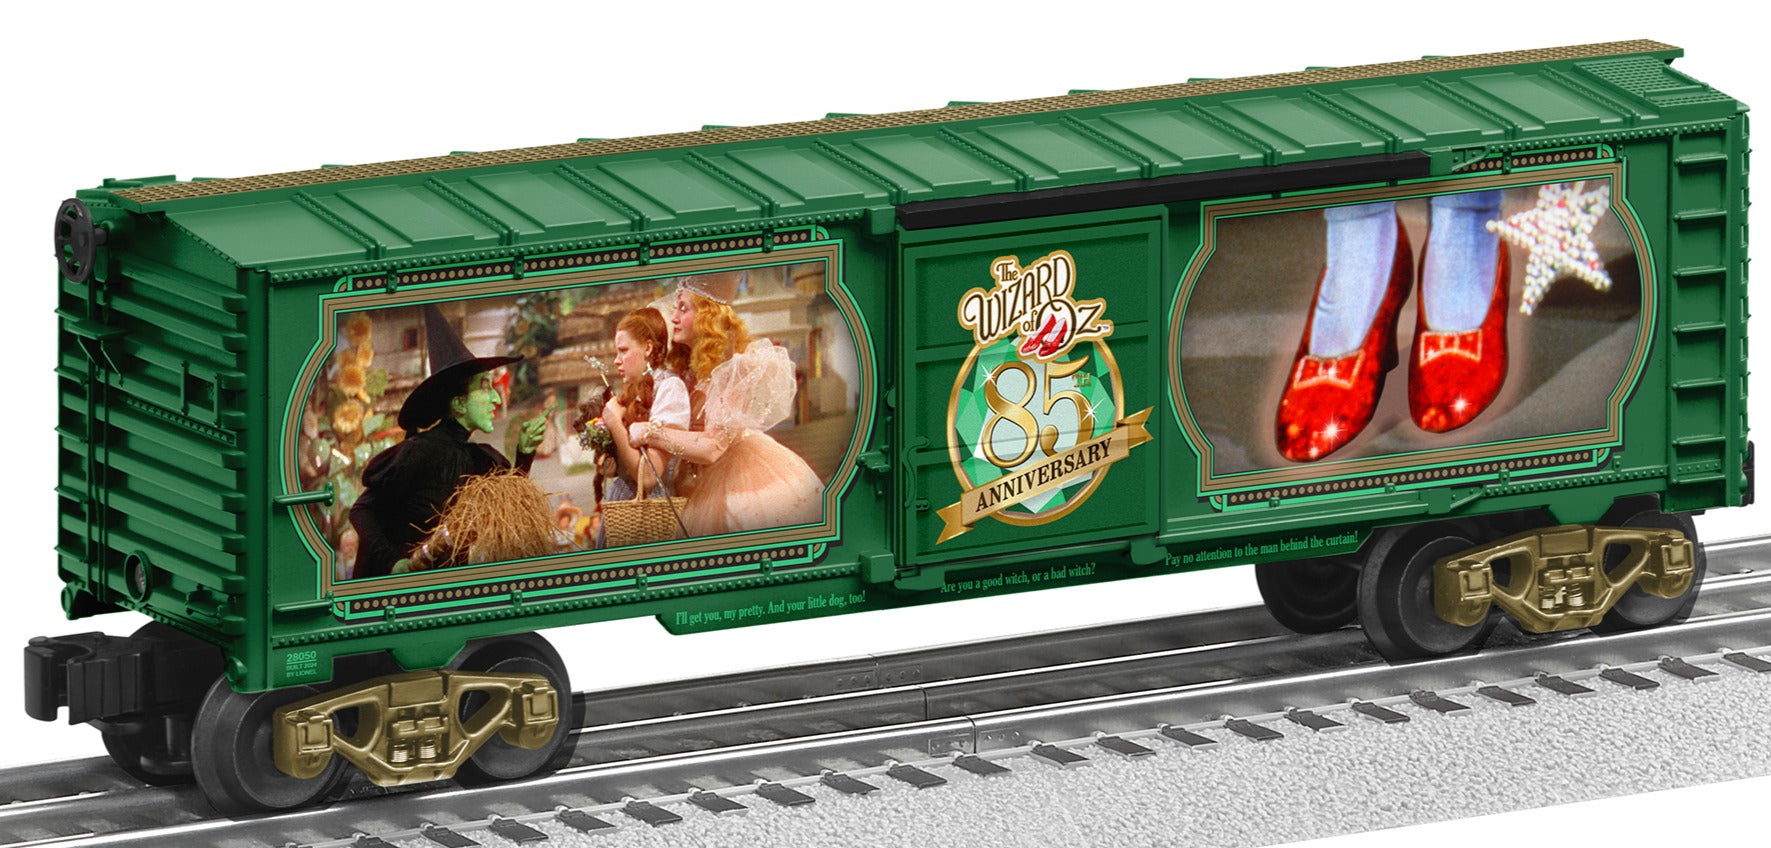 Lionel 2428050 - Wizard of Oz - 85th Anniversary Illuminated Boxcar "Red Slippers"